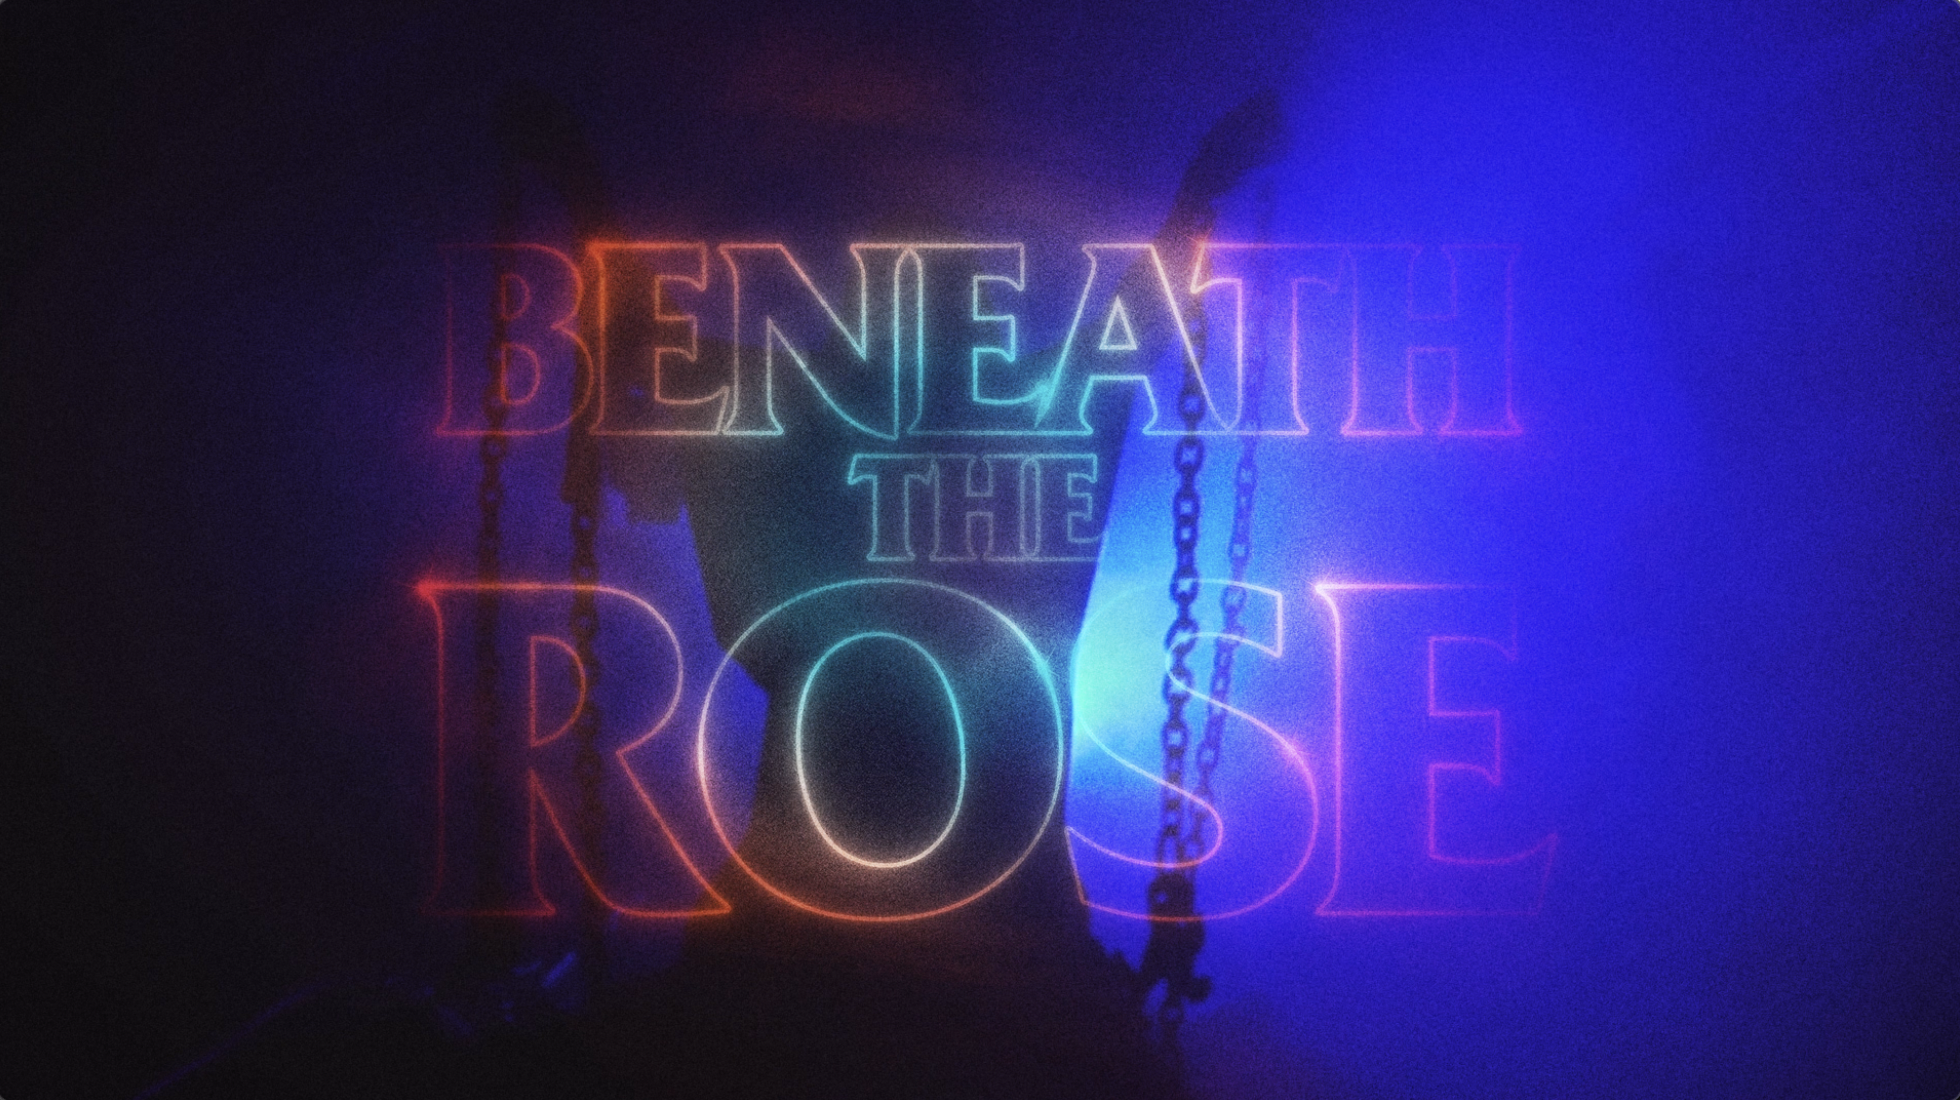 “Beneath the Rose” Out Now